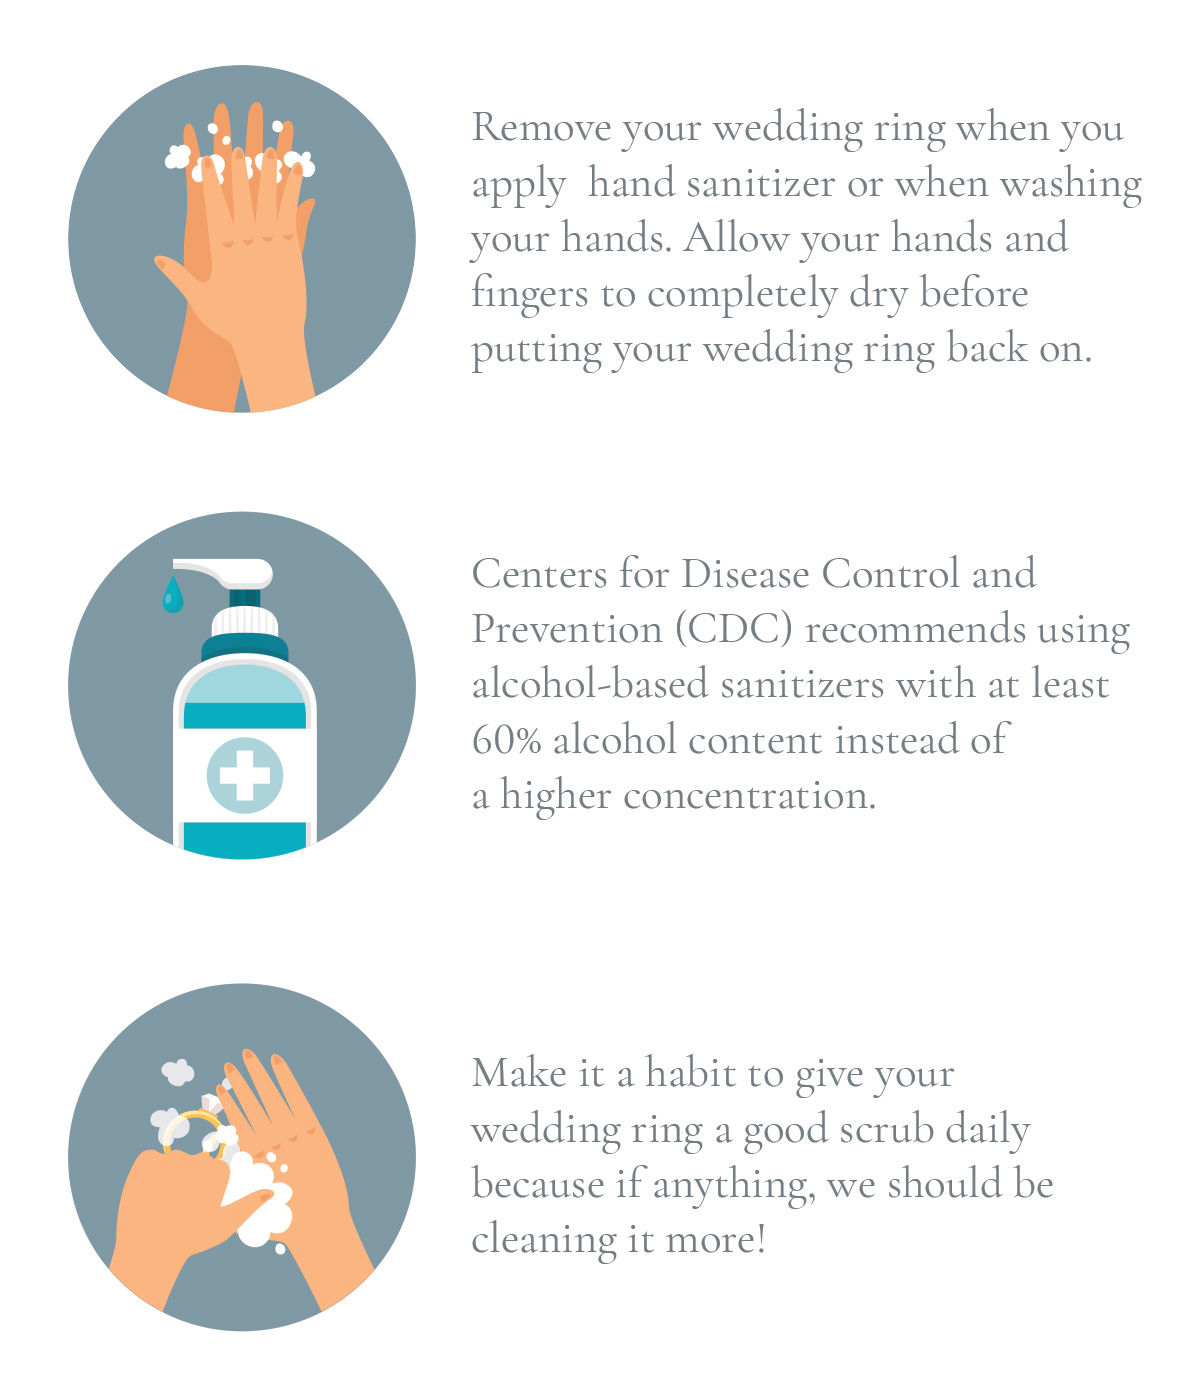 Remove your wedding ring when you apply hand sanitizer or when washing your hands. Allow your hands and fingers to completely dry before putting your wedding ring back on Centers for Disease Control and Prevention (CDC) recommends using alcohol-based sanitizers with at least 60% alcohol content instead of a higher concentration. Make it a habit to give your wedding ring a good scrub daily because if anything, we should be cleaning it more!